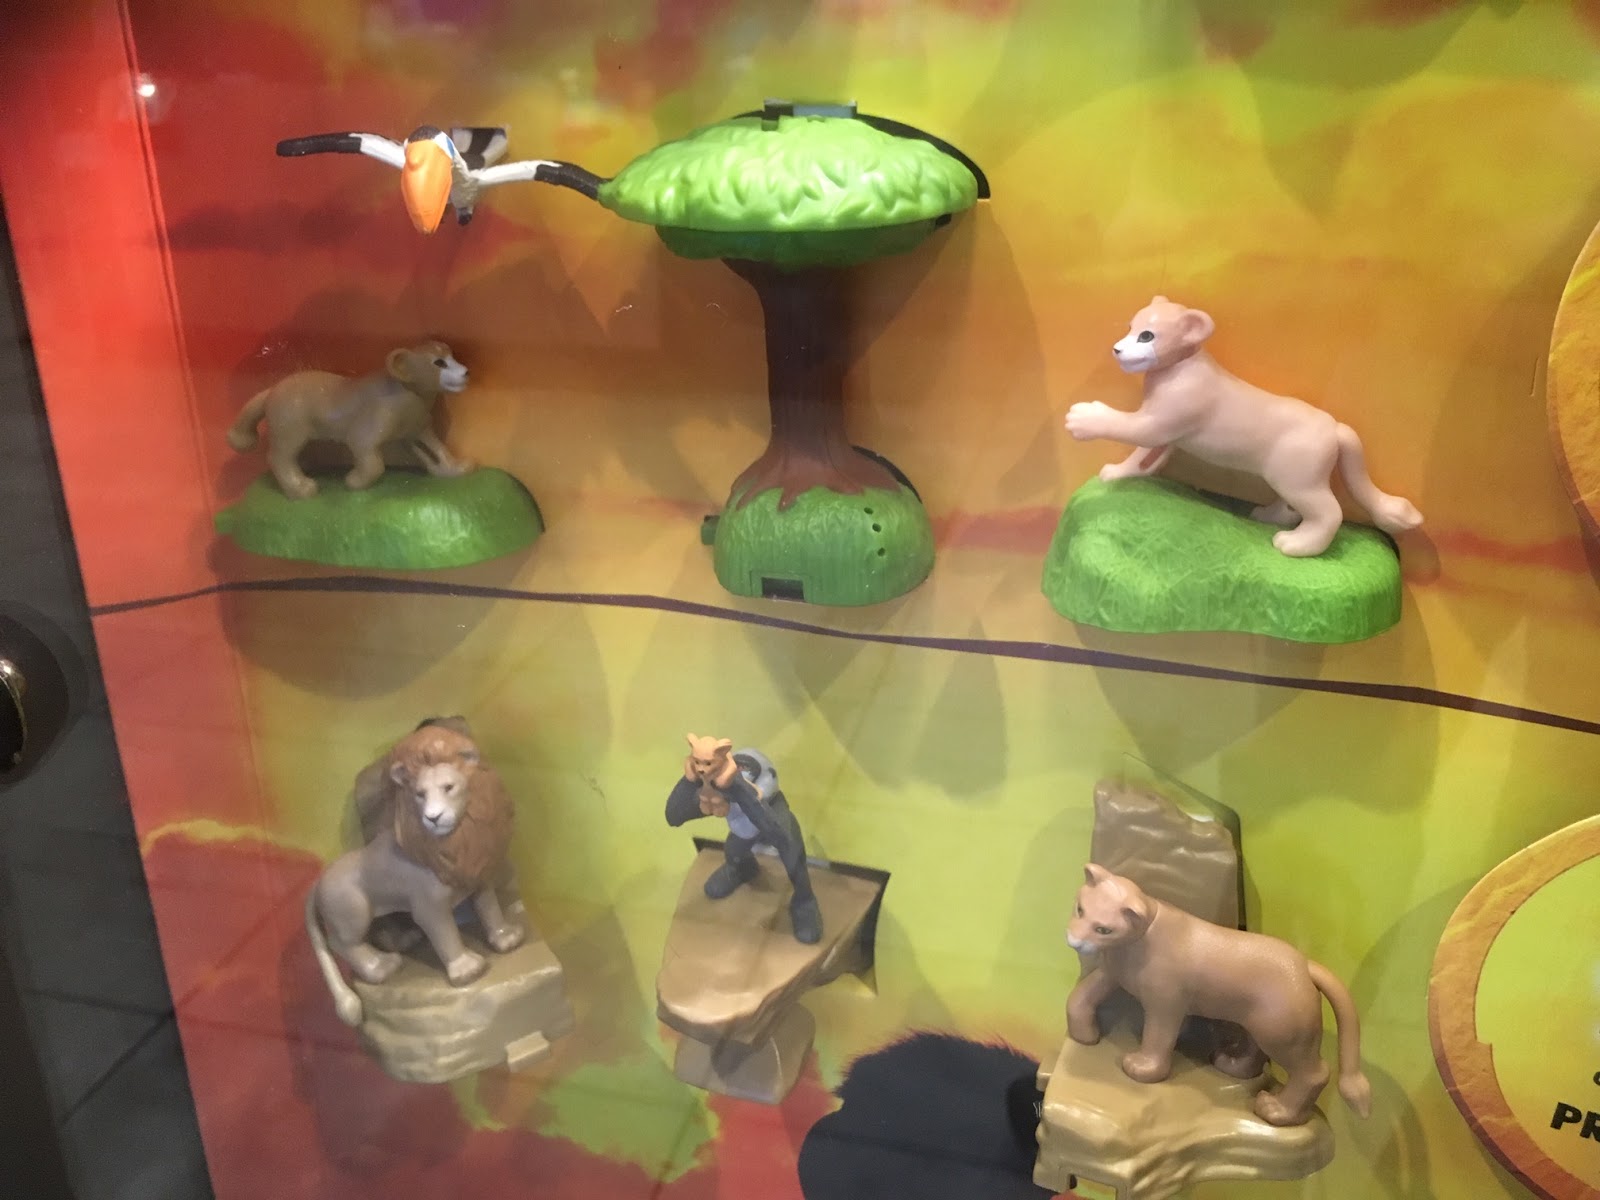 the lion king toys at mcdonald's